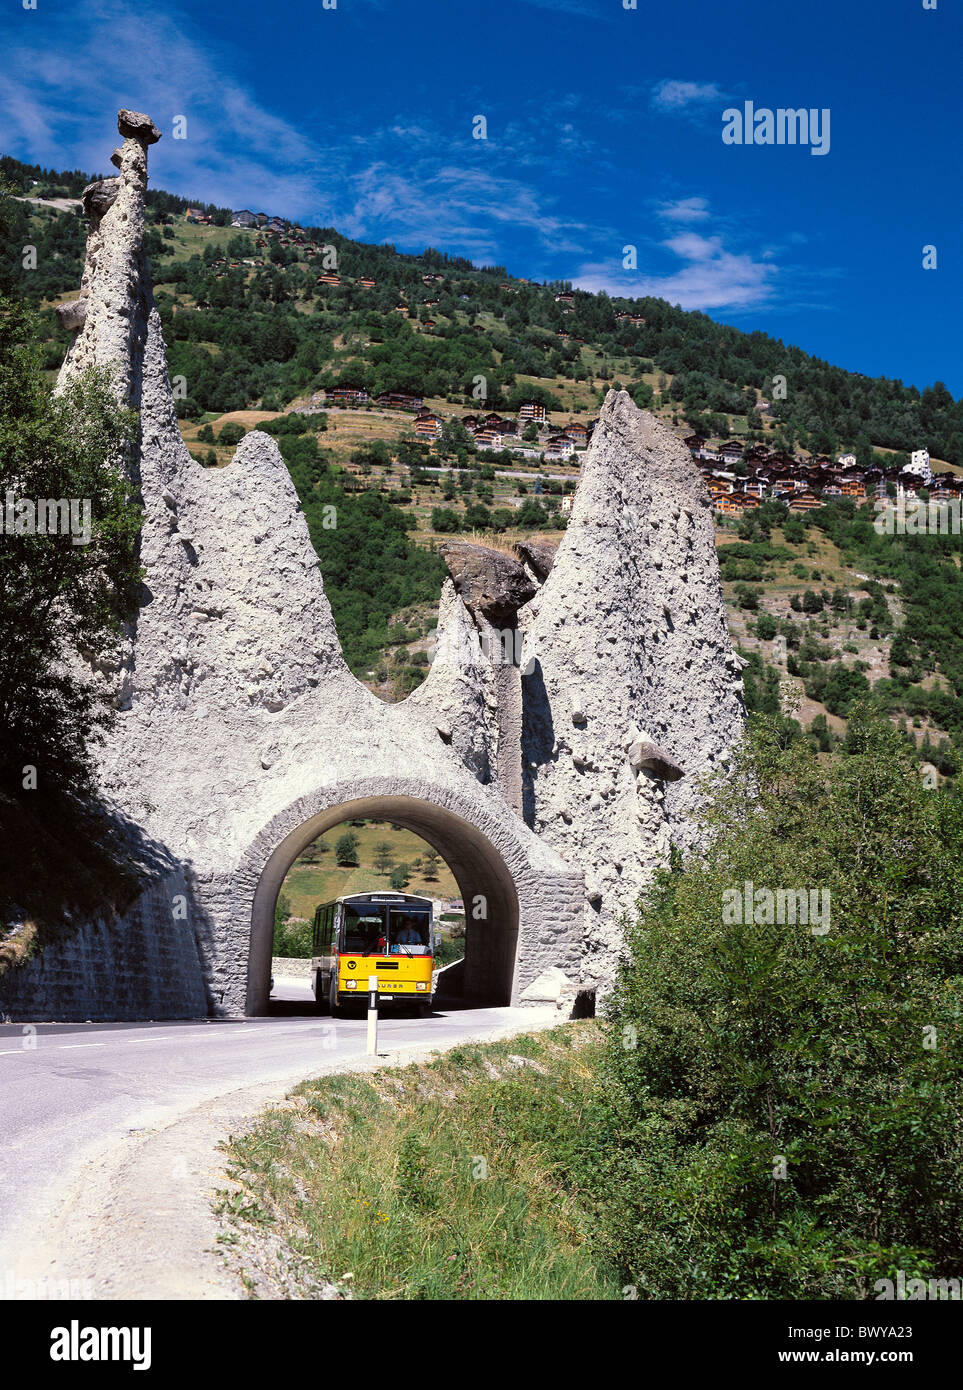 Car Postal Suisse Europe Valais falaise falaise formations of Euseigne Pyramides pyramide transport bus tunnel Banque D'Images